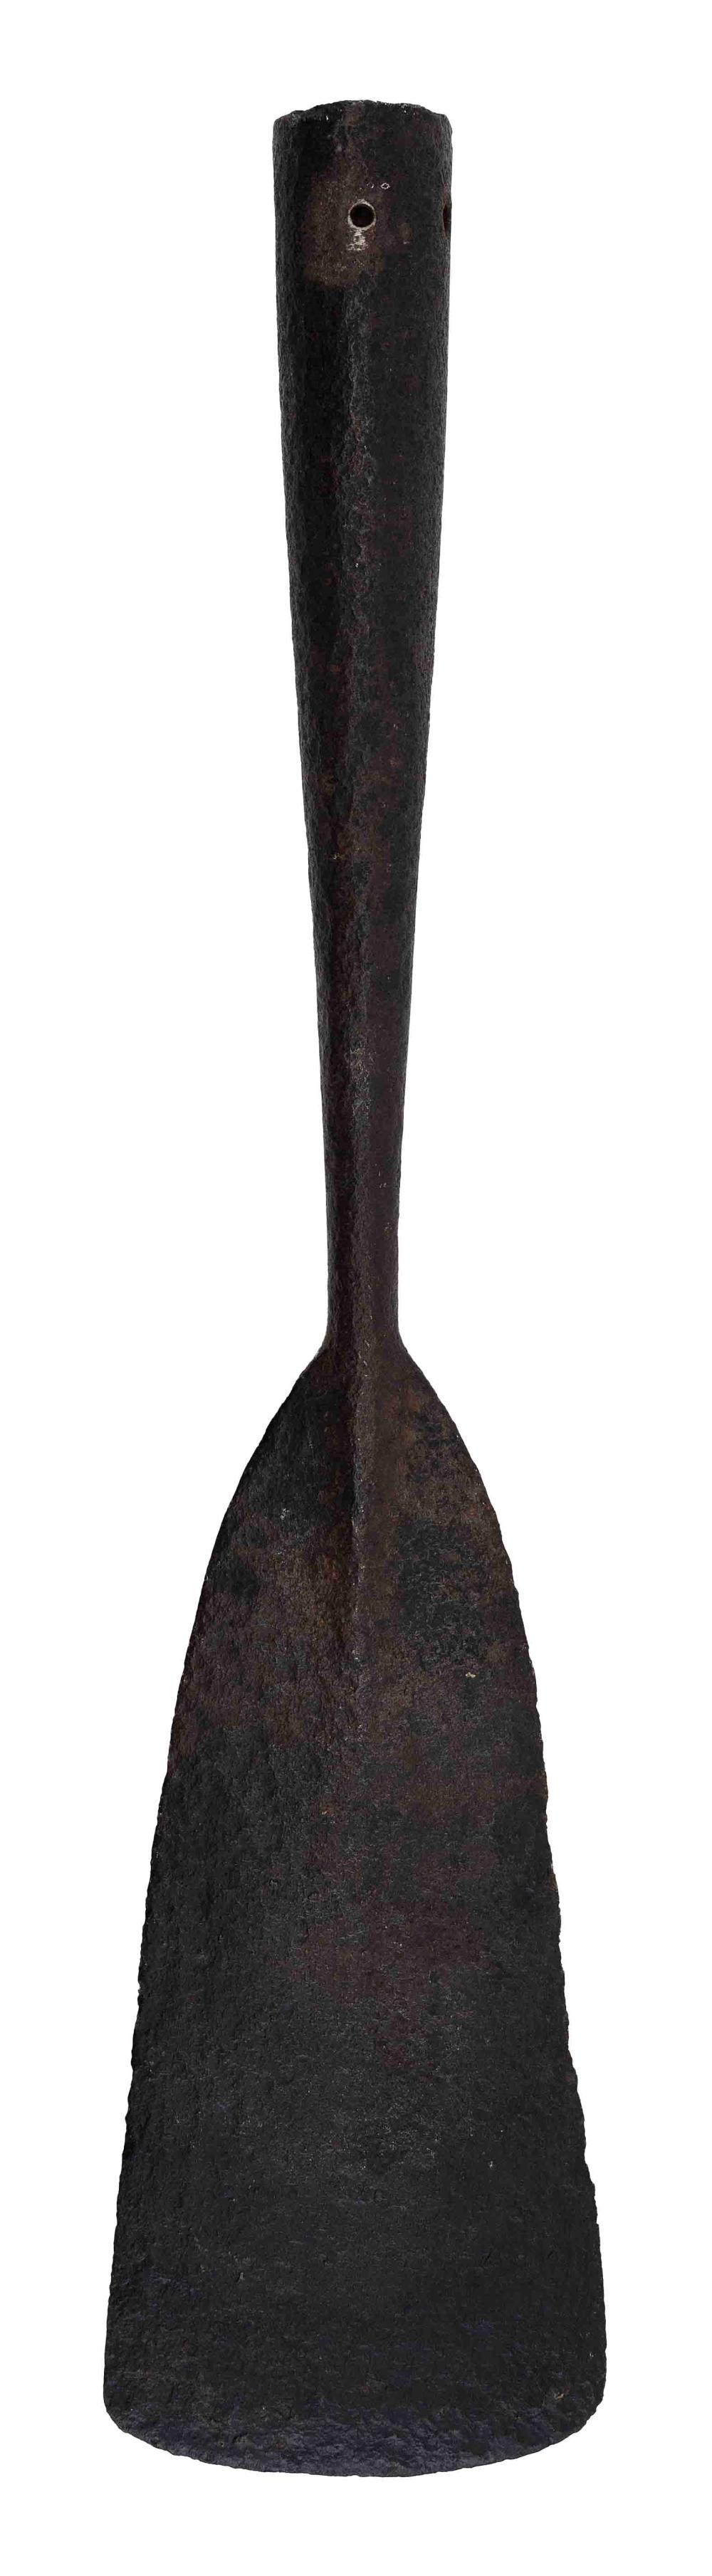 WROUGHT IRON BLUBBER SPADE MID 19TH 2f12a9